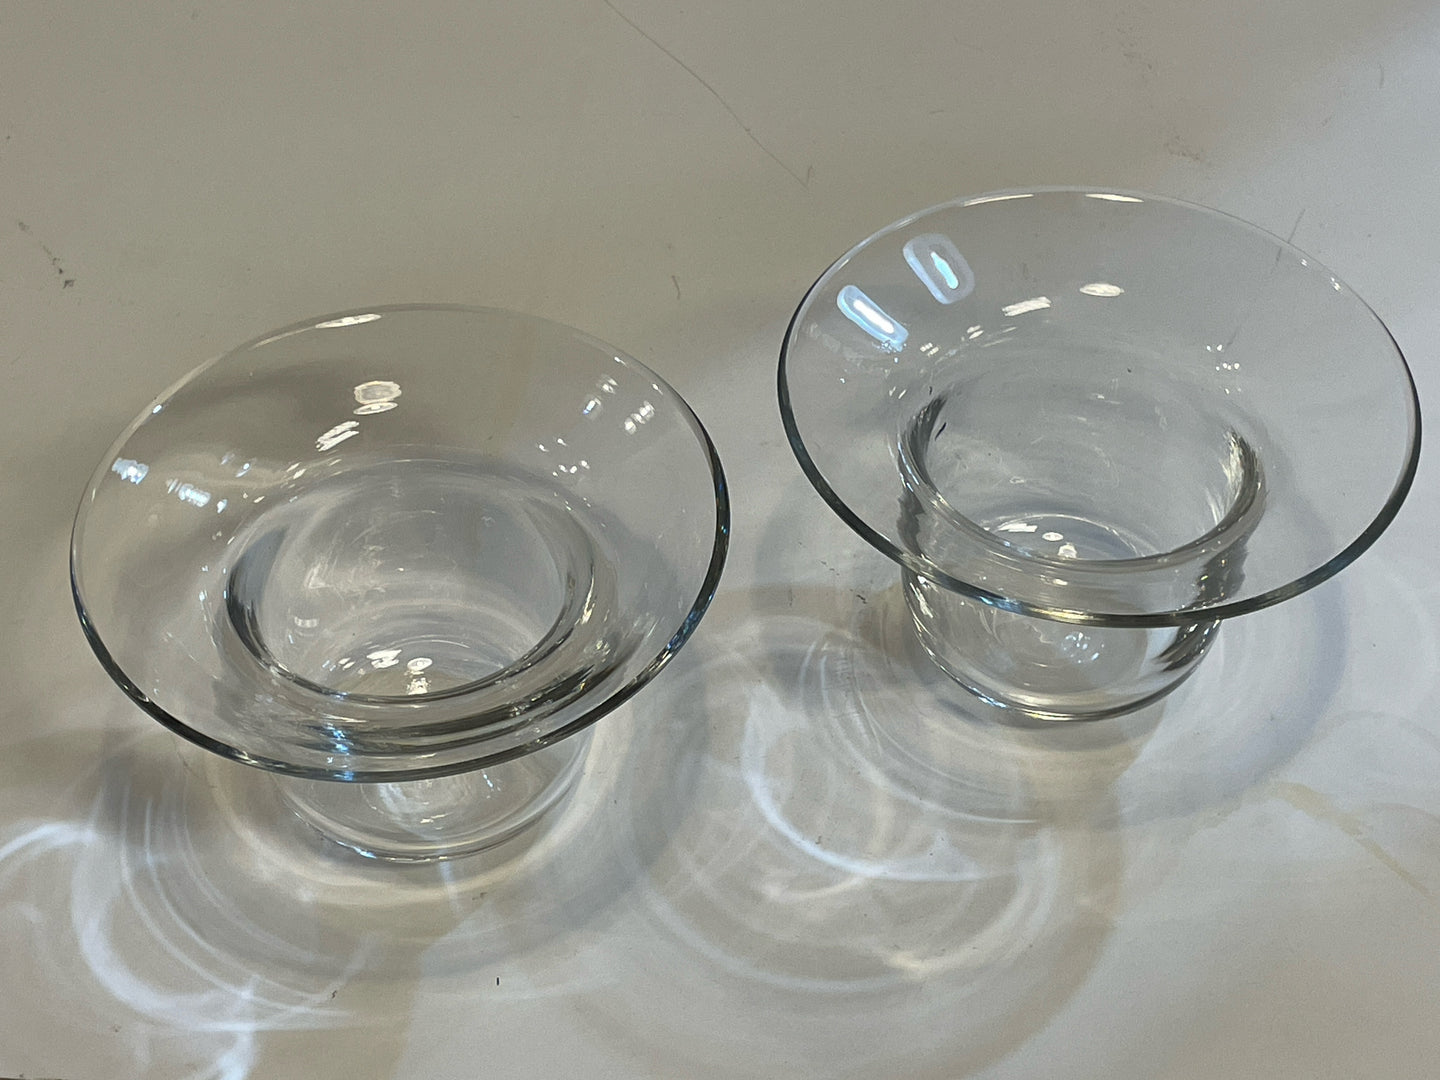 Pair of Clear Glass Candleholders